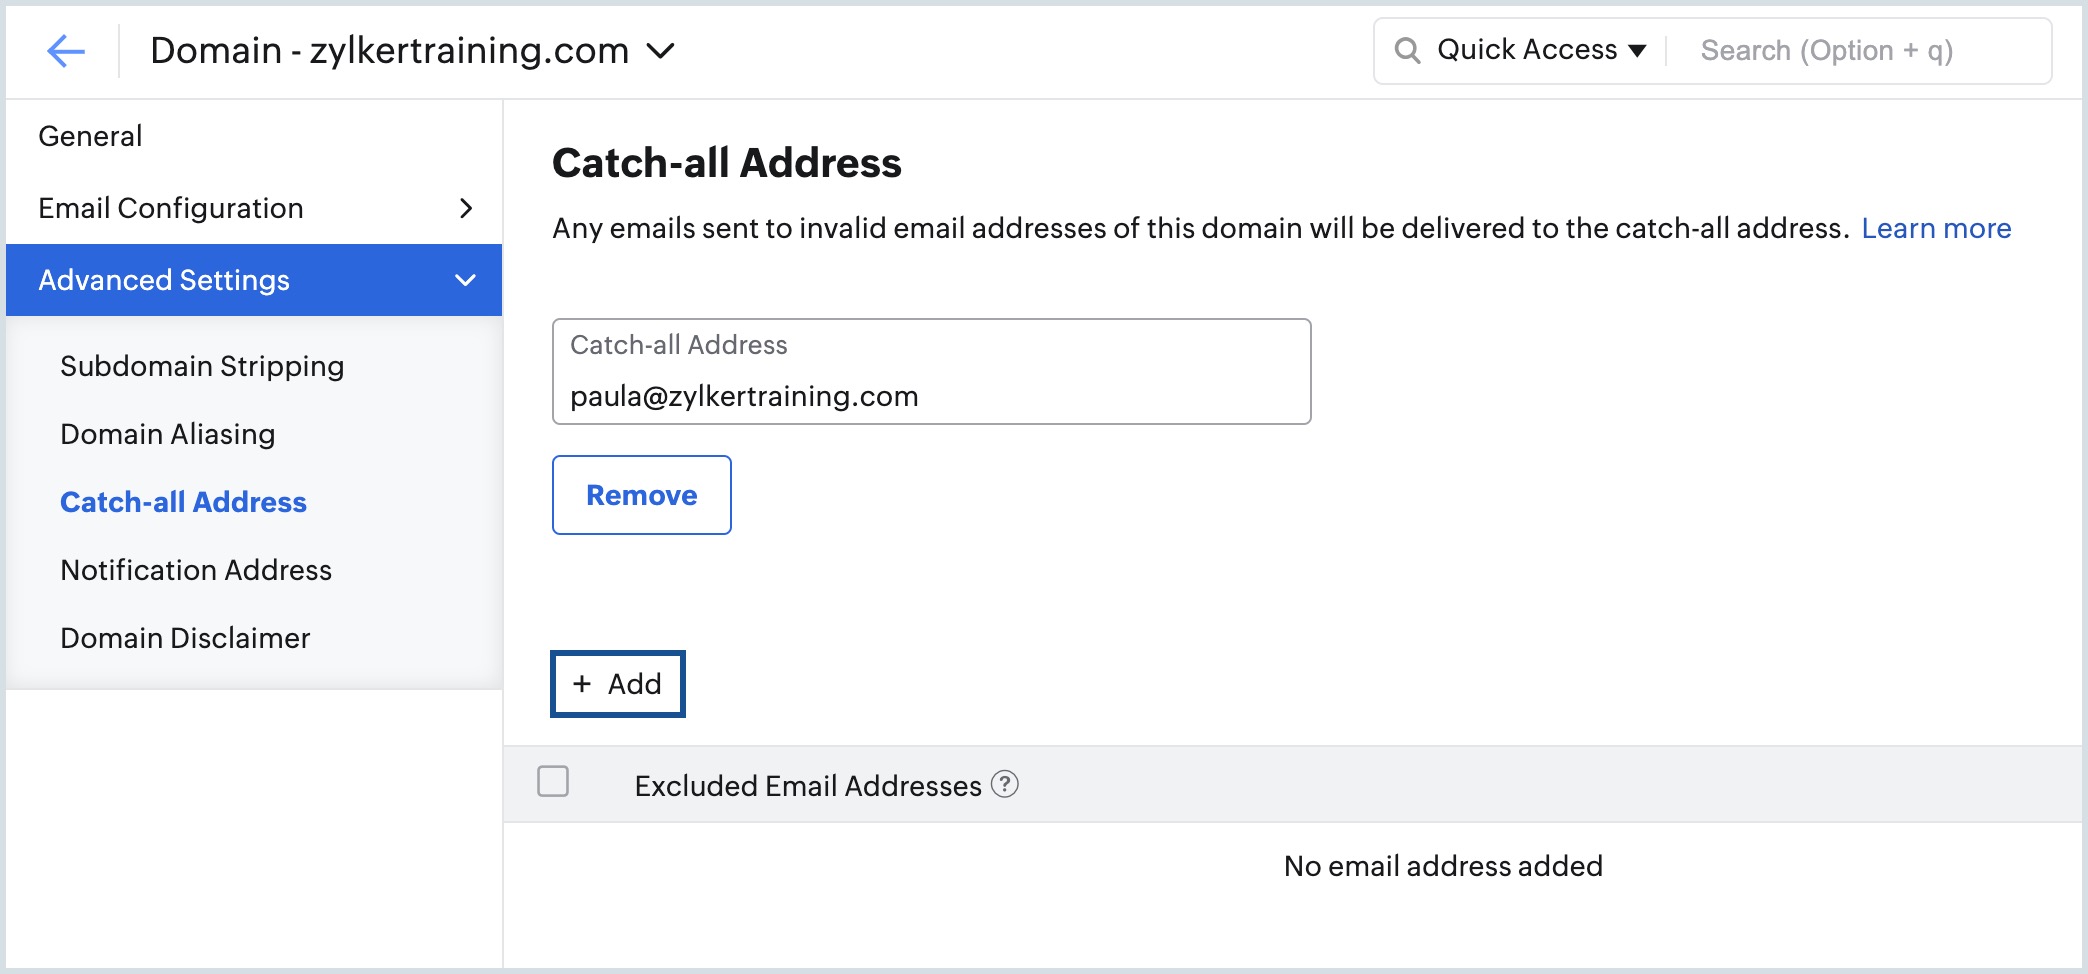 add email address to excluded list